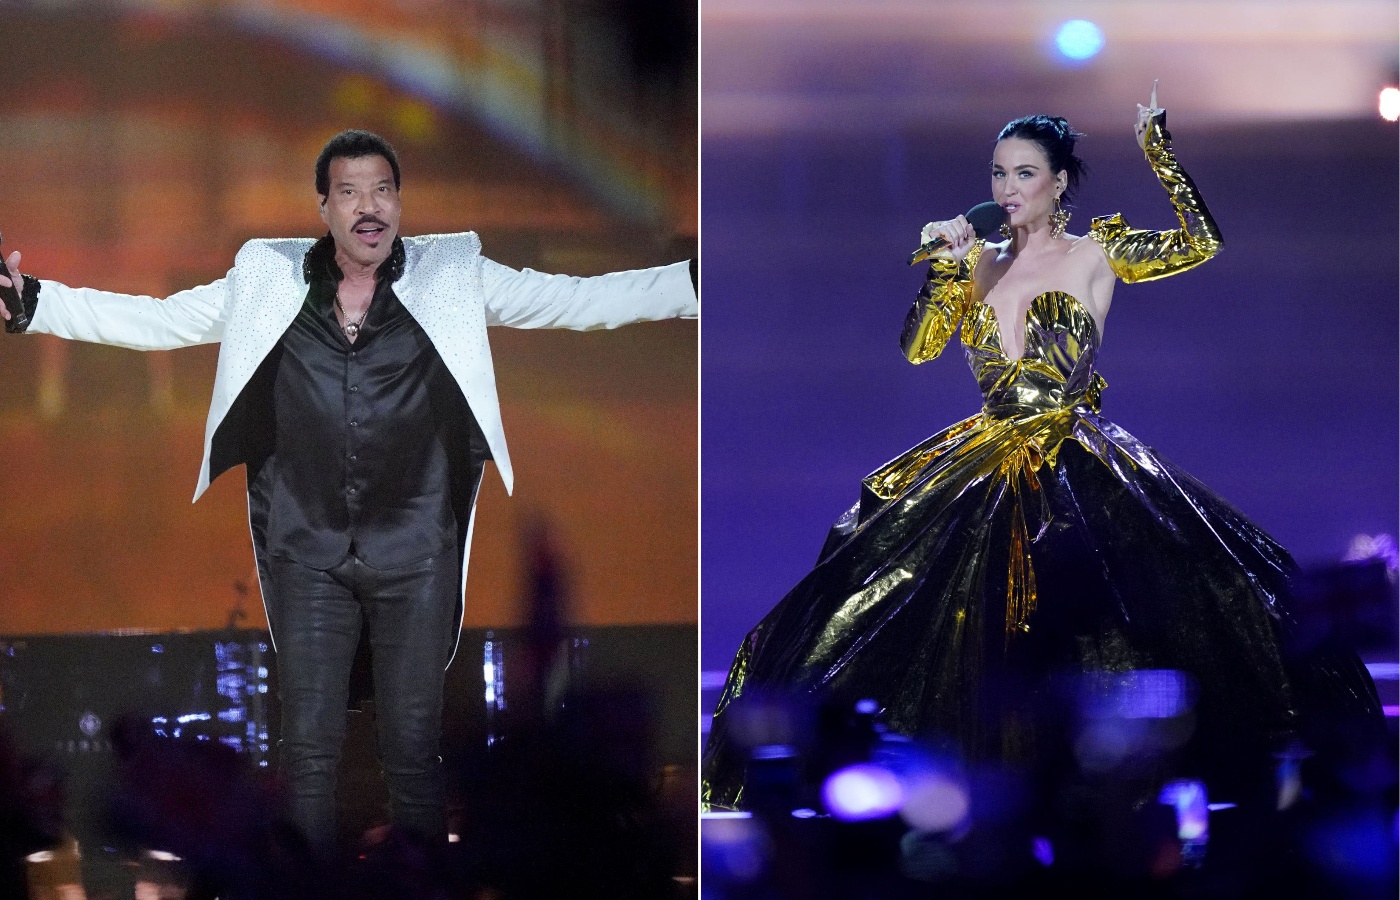 Lionel Richie and Katy Perry were amongst the stars at the Coronation Concert.